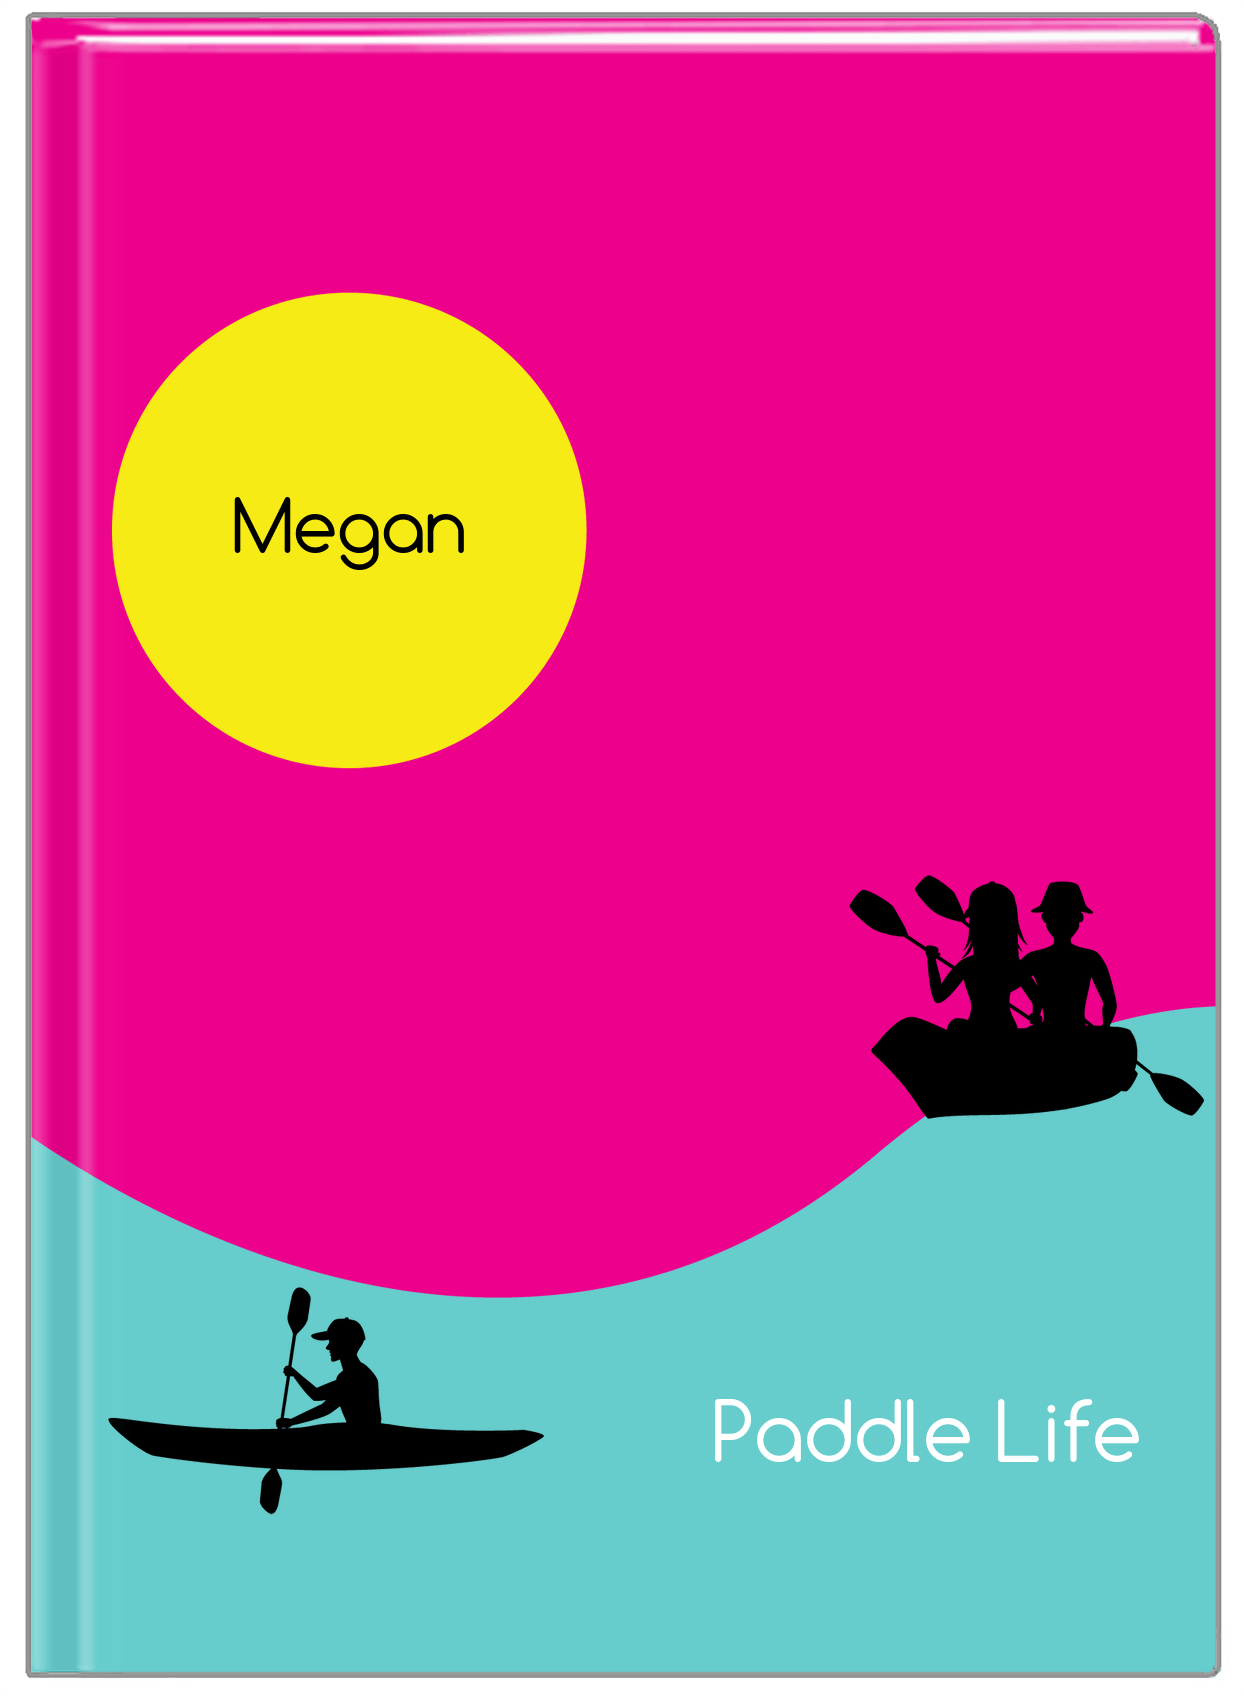 Personalized Beach Journal XII - Paddle Life - Pink Background - Front View